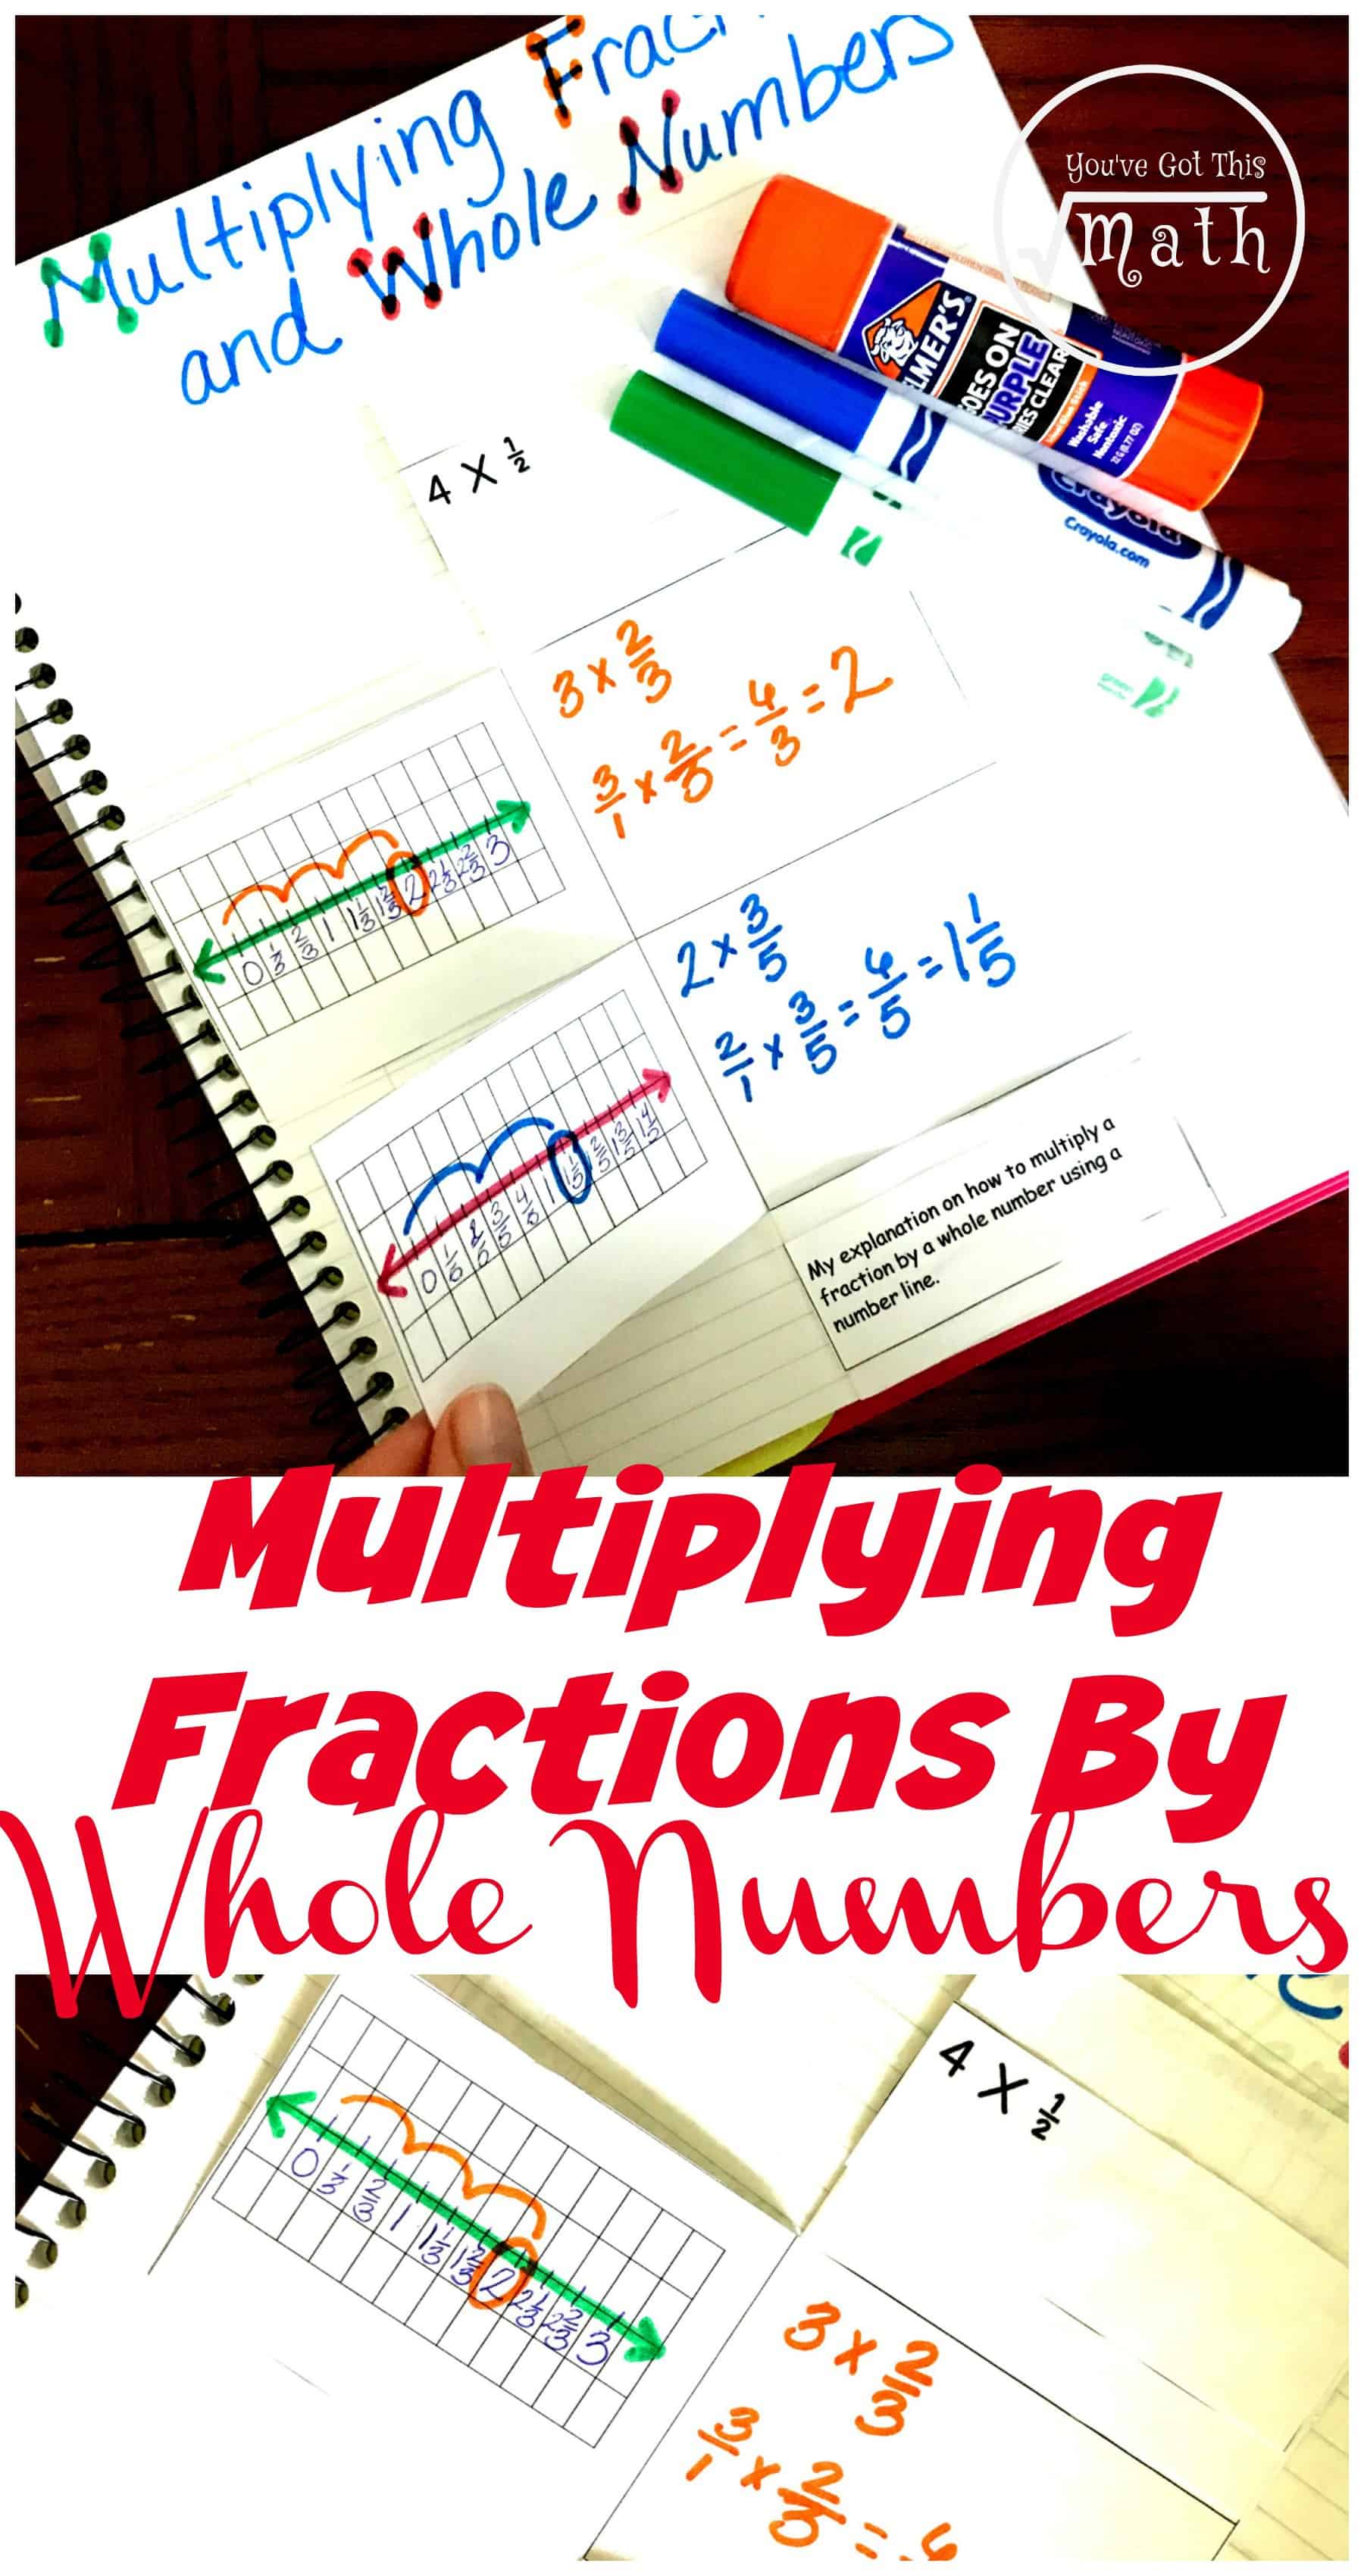 This multiplying fraction activity will help students understand what how to multiply fractions by whole numbers using the number line and an algorithm.